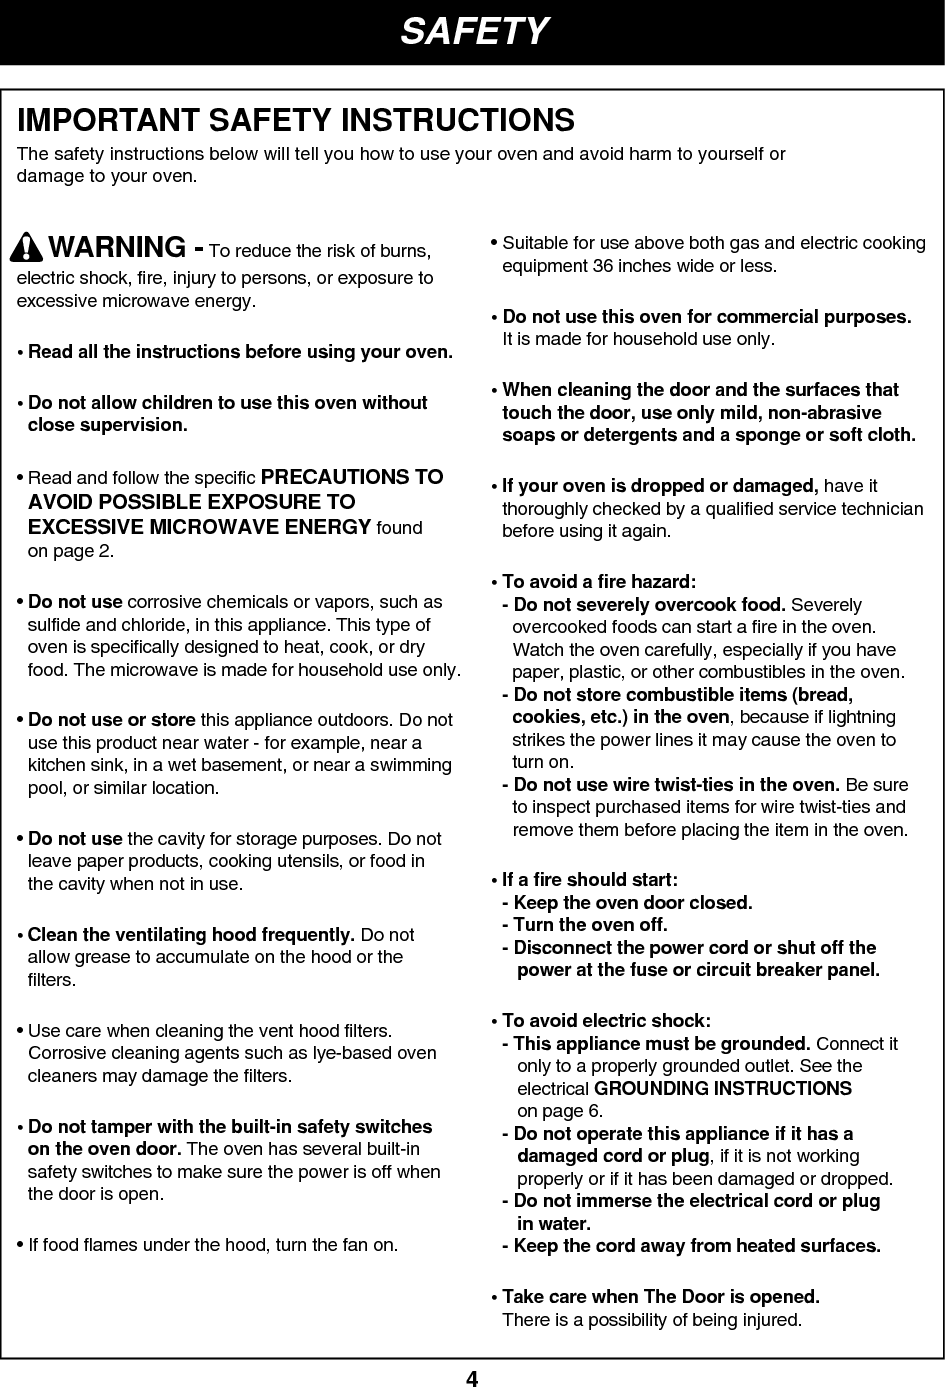 SAFETY4IMPORTANT SAFETY INSTRUCTIONSThe safety instructions below will tell you how to use your oven and avoid harm to yourself ordamage to your oven.WARNING - To reduce the risk of burns,electric shock, fire, injury to persons, or exposure toexcessive microwave energy.• Read all the instructions before using your oven.• Do not allow children to use this oven withoutclose supervision.• Read and follow the specific PRECAUTIONS TOAVOID POSSIBLE EXPOSURE TOEXCESSIVE MICROWAVE ENERGY foundon page 2.• Do not use corrosive chemicals or vapors, such assulfide and chloride, in this appliance. This type ofoven is specifically designed to heat, cook, or dryfood. The microwave is made for household use only.• Do not use or store this appliance outdoors. Do notuse this product near water - for example, near akitchen sink, in a wet basement, or near a swimmingpool, or similar location.• Do not use the cavity for storage purposes. Do notleave paper products, cooking utensils, or food inthe cavity when not in use.• Clean the ventilating hood frequently. Do notallow grease to accumulate on the hood or thefilters.• Use care when cleaning the vent hood filters.Corrosive cleaning agents such as lye-based ovencleaners may damage the filters.• Do not tamper with the built-in safety switcheson the oven door. The oven has several built-insafety switches to make sure the power is off whenthe door is open.• If food flames under the hood, turn the fan on.• Suitable for use above both gas and electric cookingequipment 36 inches wide or less.• Do not use this oven for commercial purposes.It is made for household use only.• When cleaning the door and the surfaces thattouch the door, use only mild, non-abrasivesoaps or detergents and a sponge or soft cloth.• If your oven is dropped or damaged, have itthoroughly checked by a qualified service technicianbefore using it again.• To avoid a fire hazard:- Do not severely overcook food. Severelyovercooked foods can start a fire in the oven.Watch the oven carefully, especially if you havepaper, plastic, or other combustibles in the oven.- Do not store combustible items (bread,cookies, etc.) in the oven, because if lightningstrikes the power lines it may cause the oven toturn on.- Do not use wire twist-ties in the oven. Be sureto inspect purchased items for wire twist-ties andremove them before placing the item in the oven.• If a fire should start:- Keep the oven door closed.- Turn the oven off.- Disconnect the power cord or shut off thepower at the fuse or circuit breaker panel.• To avoid electric shock:- This appliance must be grounded. Connect itonly to a properly grounded outlet. See theelectrical GROUNDING INSTRUCTIONSon page 6.- Do not operate this appliance if it has adamaged cord or plug, if it is not workingproperly or if it has been damaged or dropped.- Do not immerse the electrical cord or plug in water.- Keep the cord away from heated surfaces.• Take care when The Door is opened.There is a possibility of being injured.